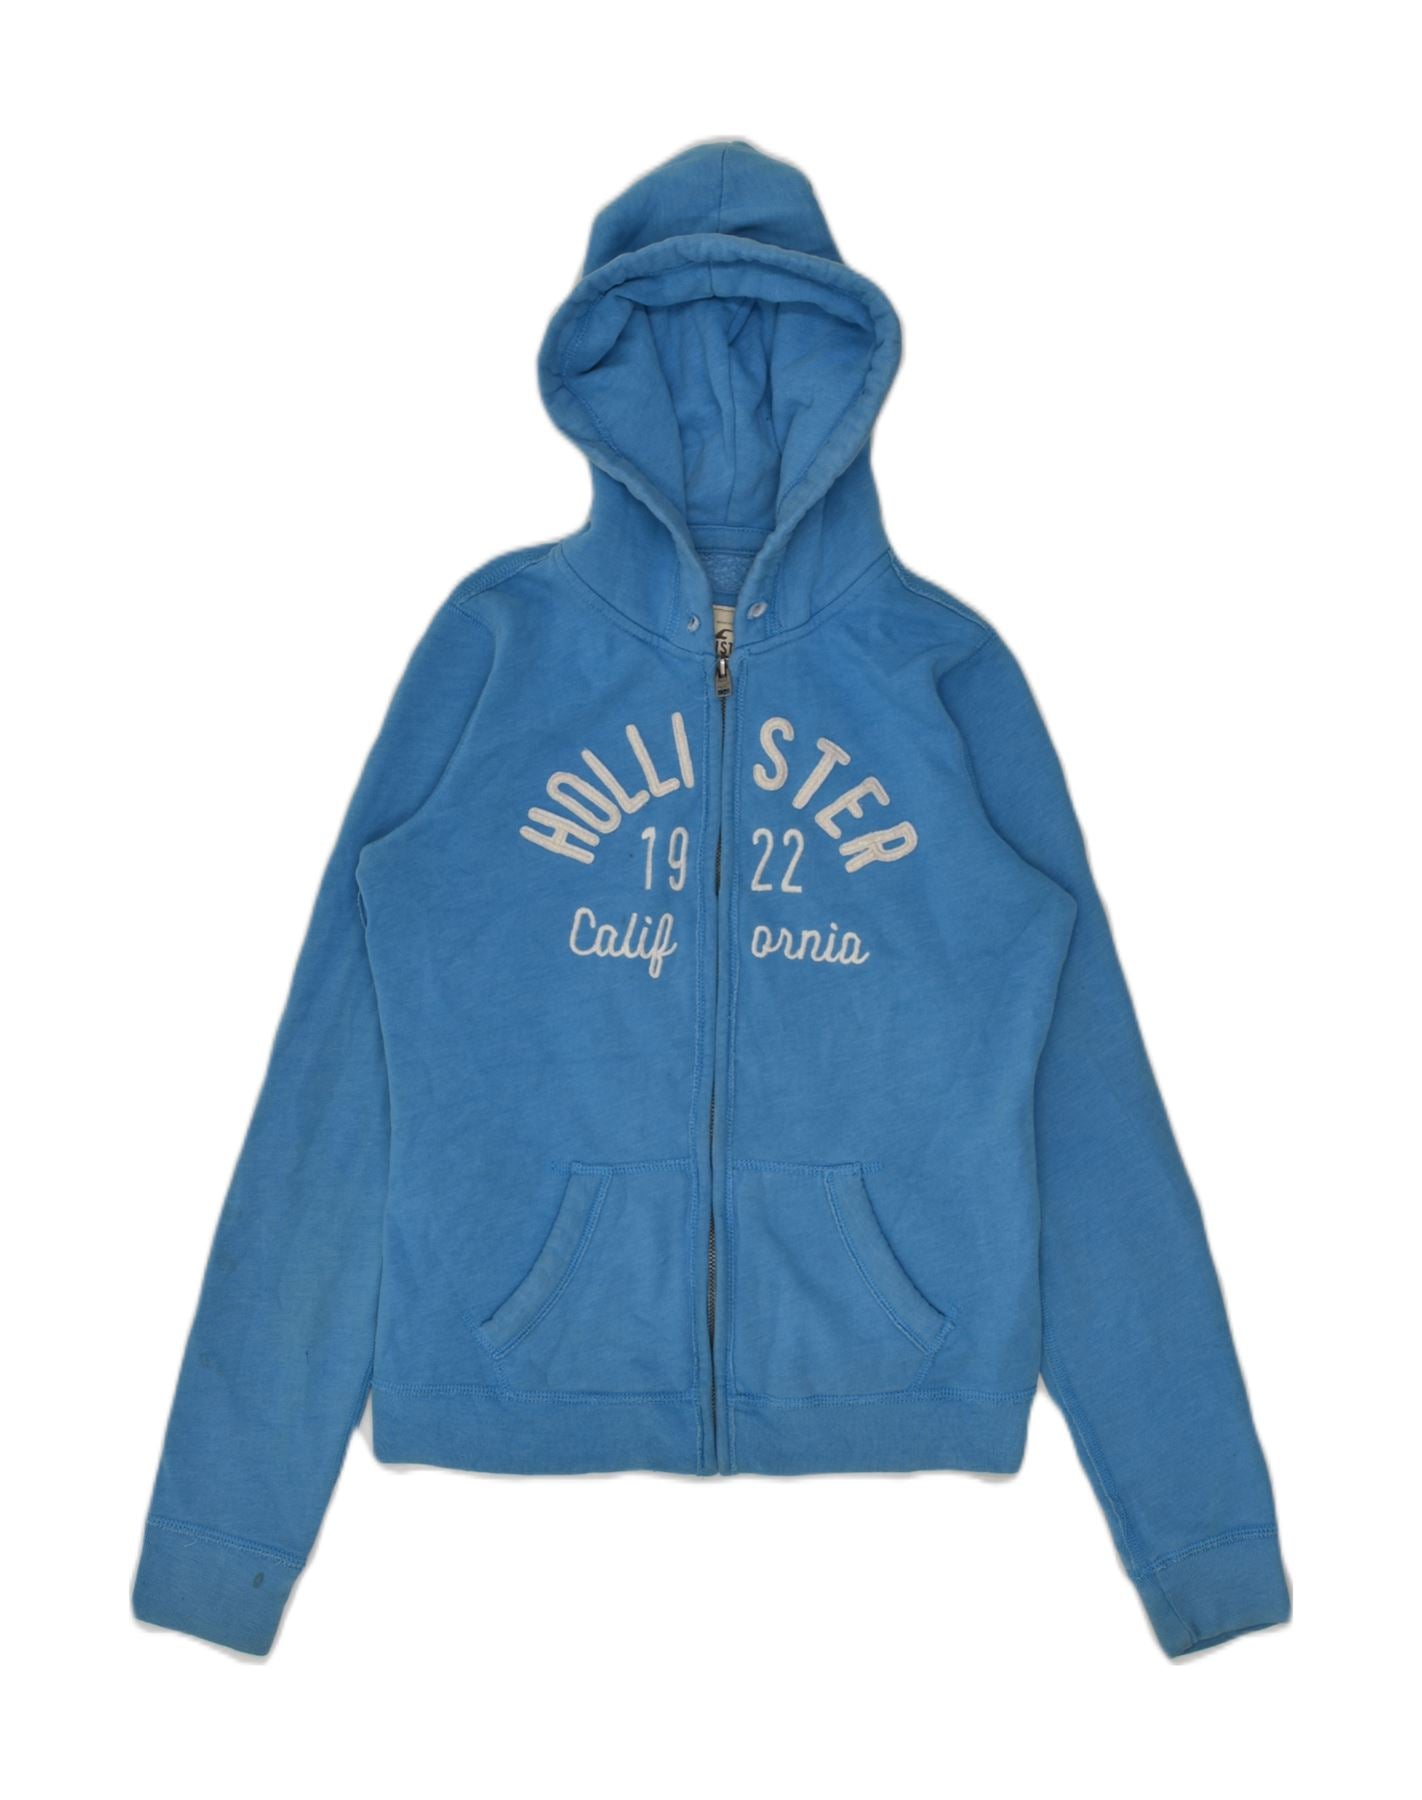 HOLLISTER Womens Graphic Zip Hoodie Sweater UK 10 Small Blue Cotton, Vintage & Second-Hand Clothing Online